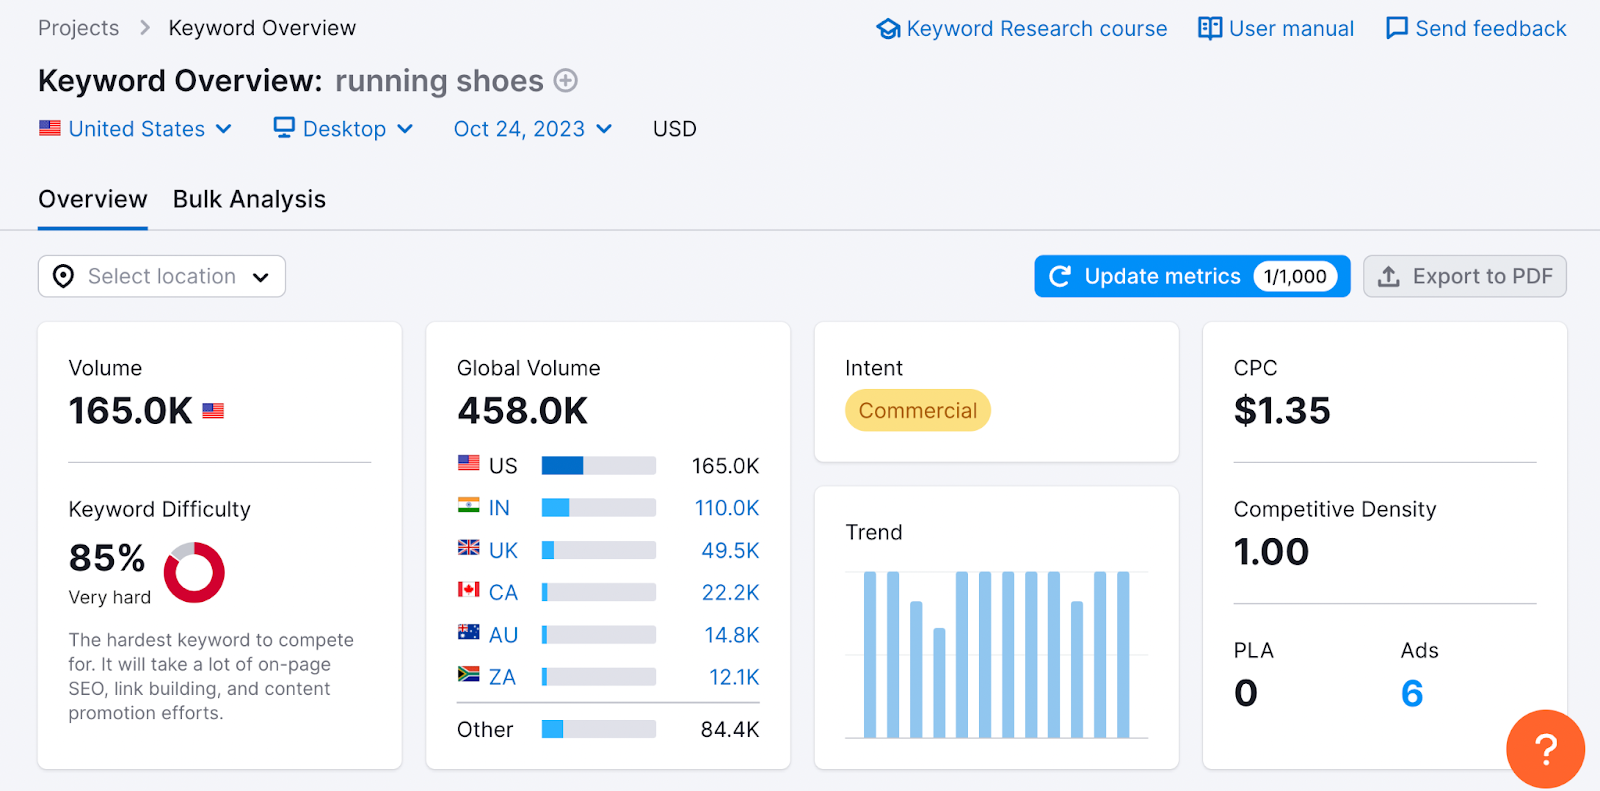 Keyword Overview results for "running shoes"